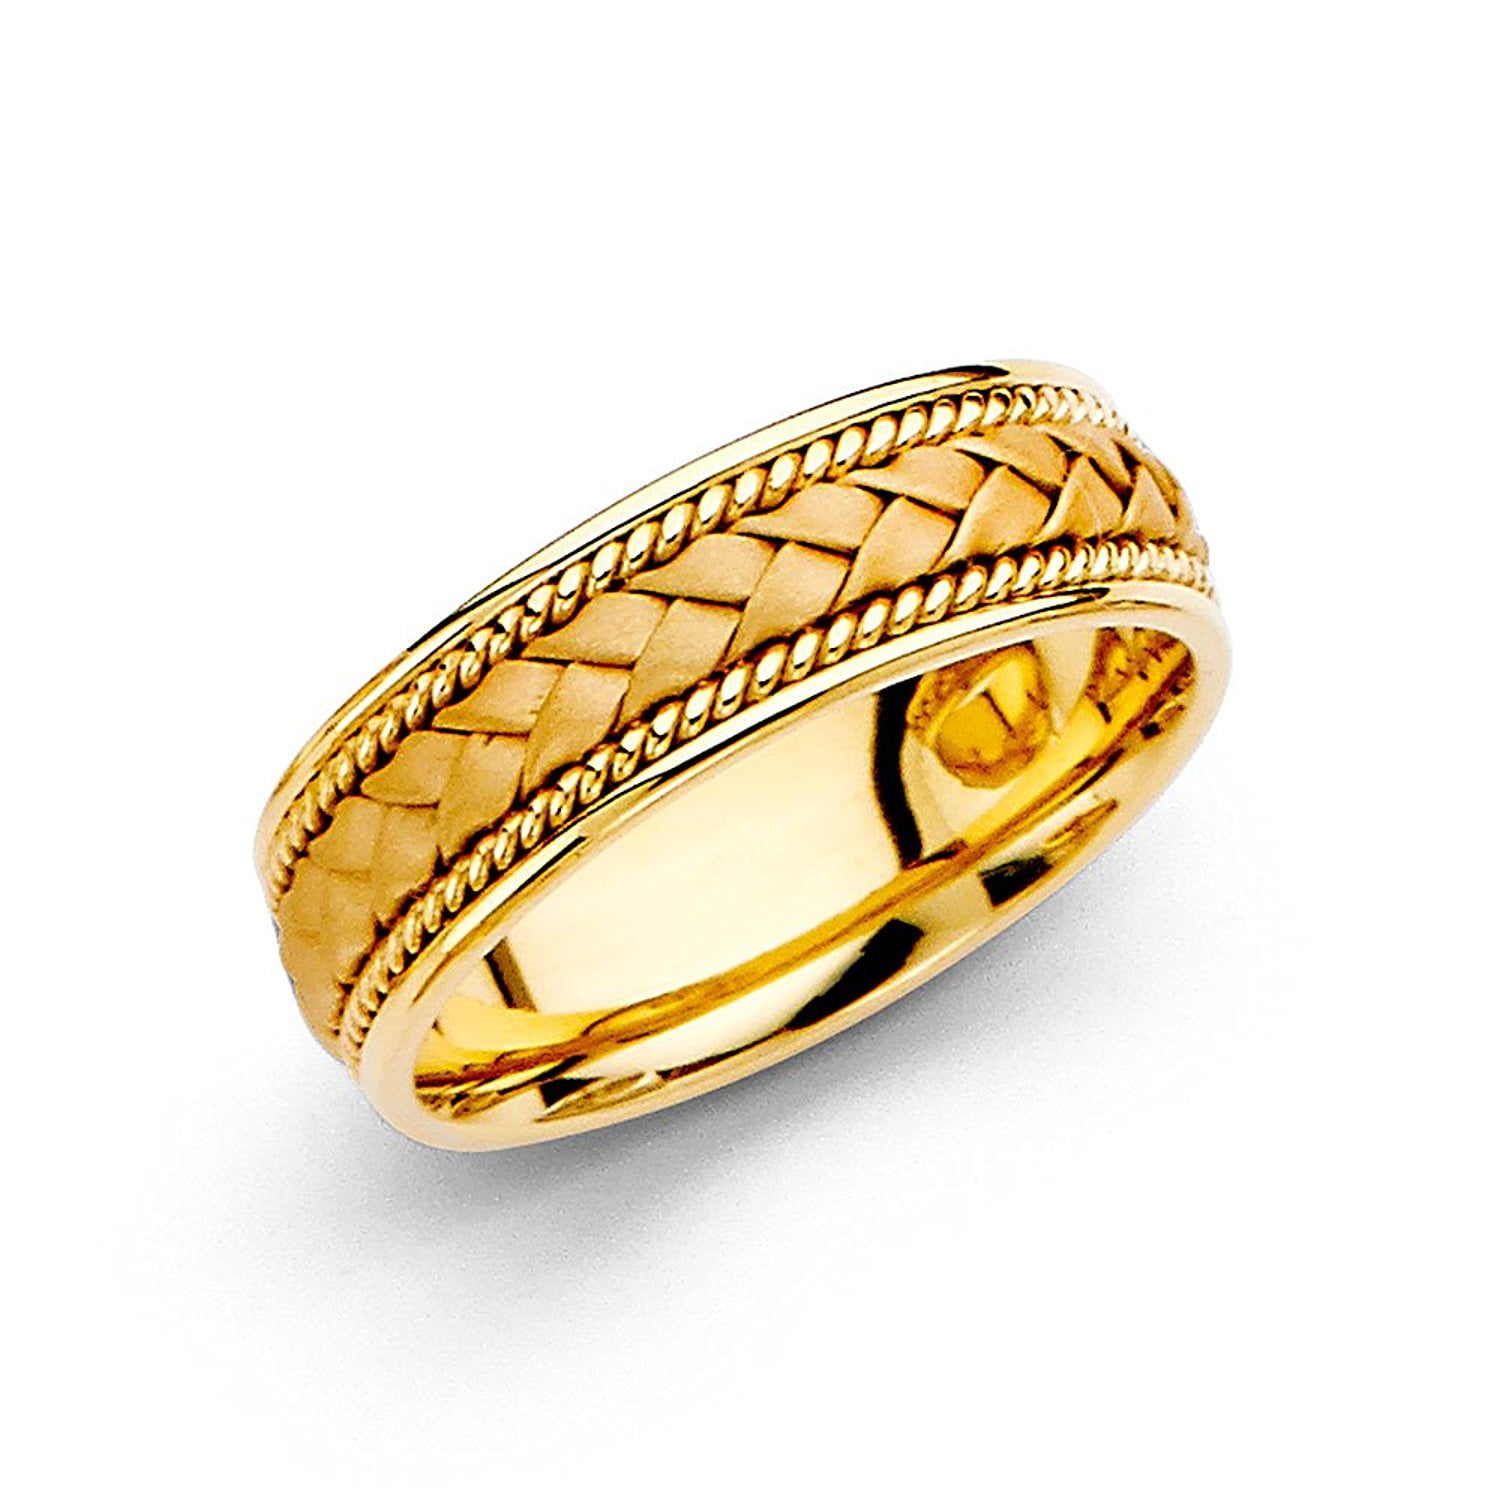 Gemini Free Engrave His and Her Groom Bride 18K Yellow Gold P Matching  Anniversary Wedding Couple Ring Valentine Day Gift|Amazon.com